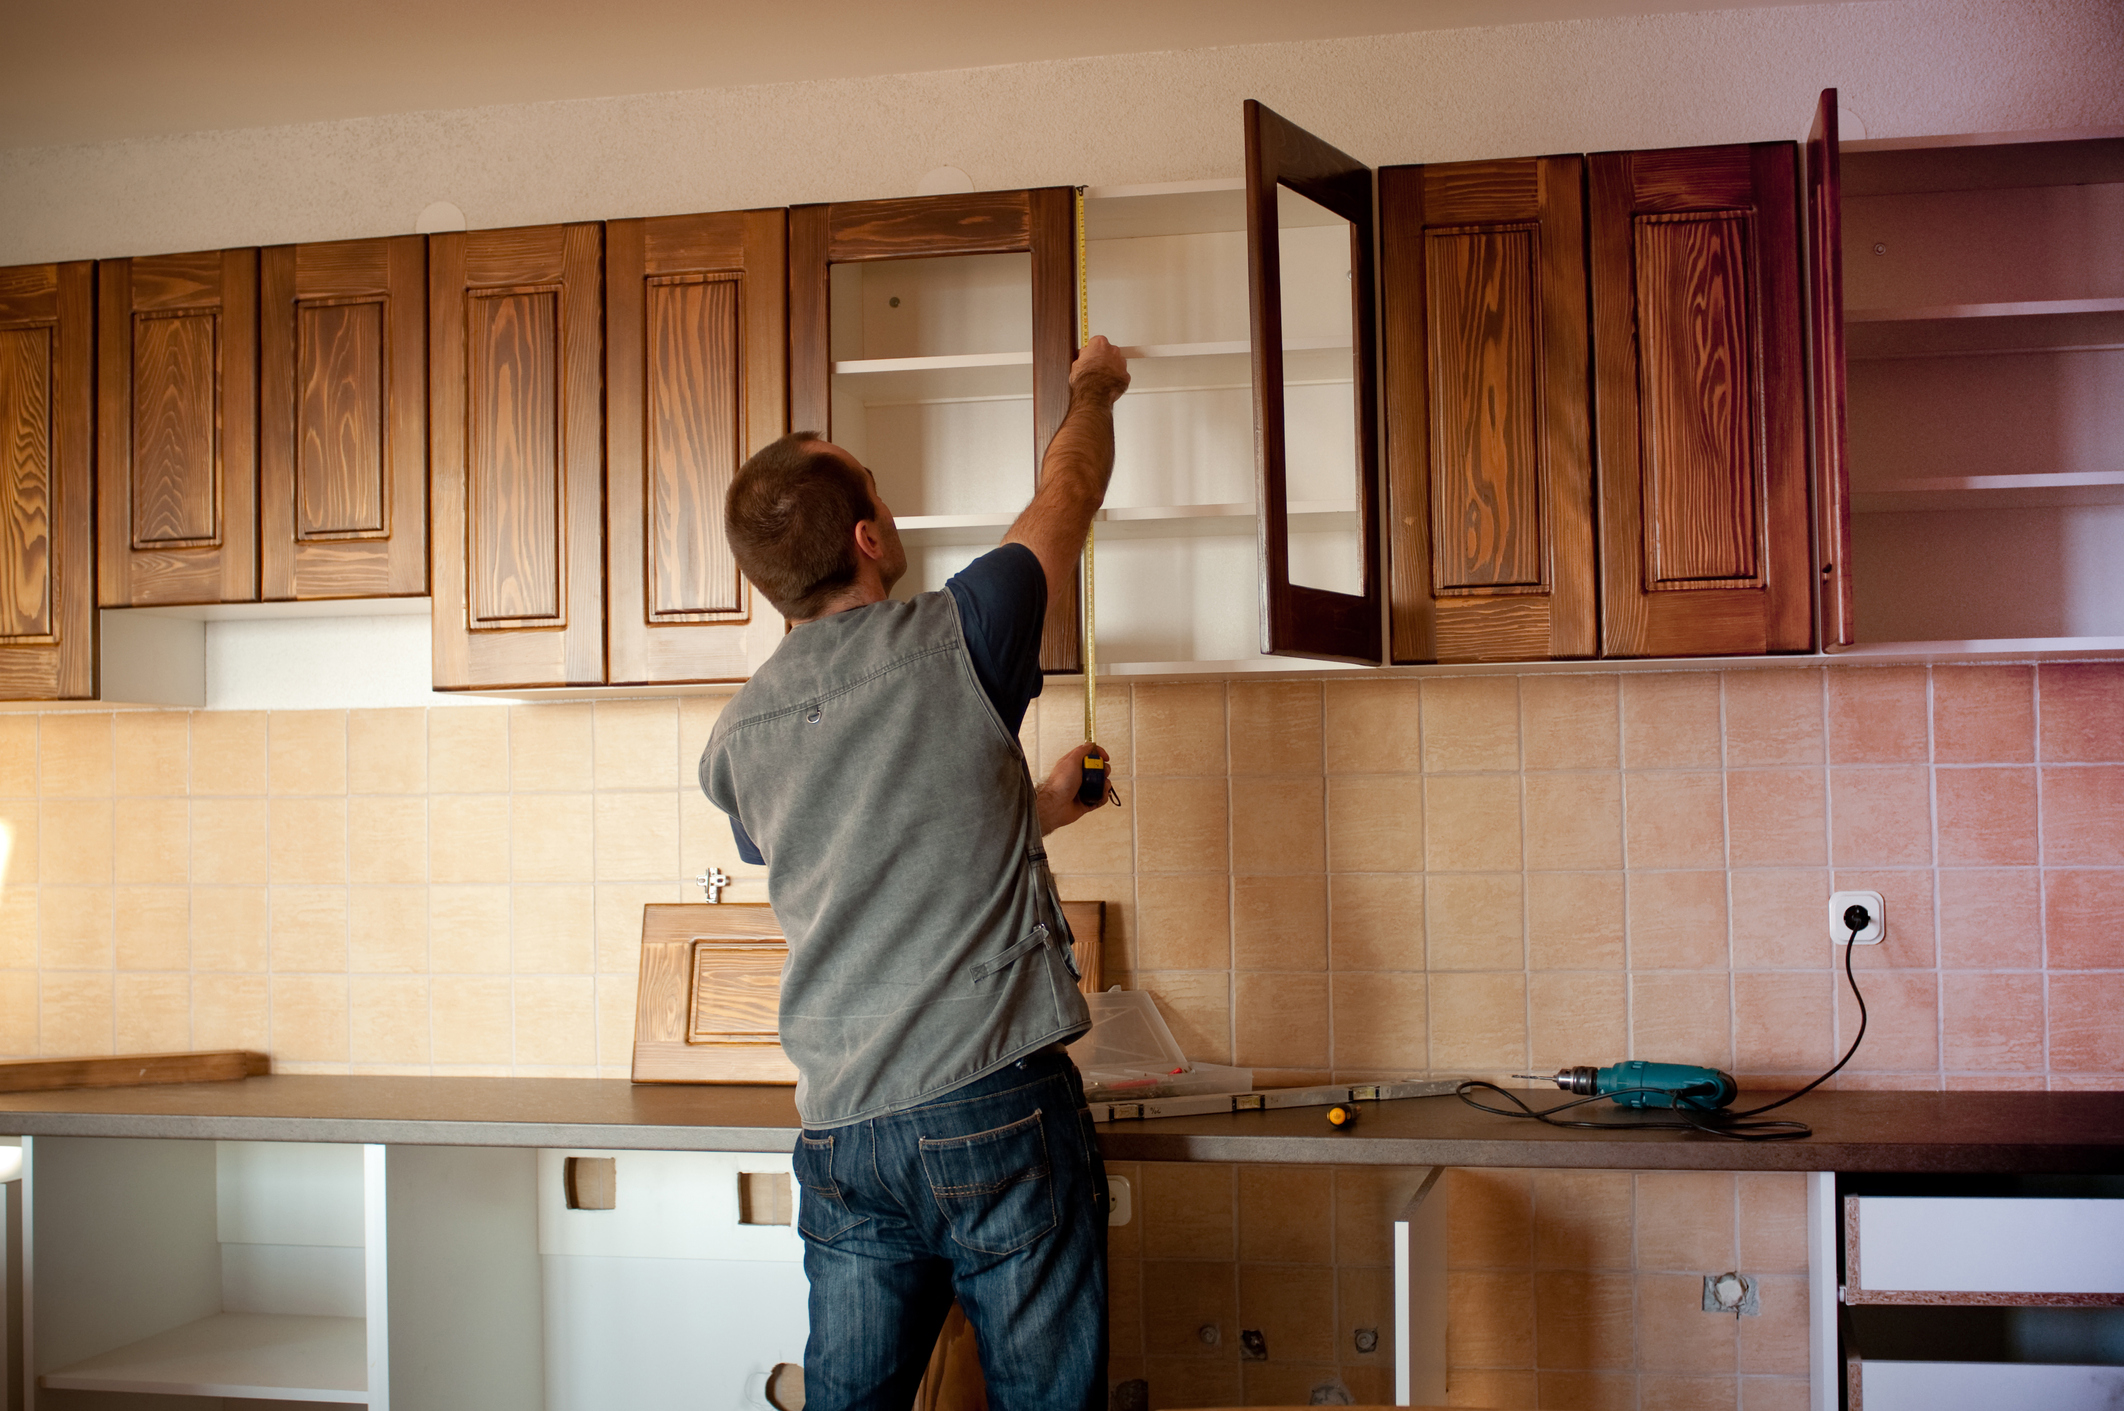 How to Find Home Remodeling Services in Pompano Beach?